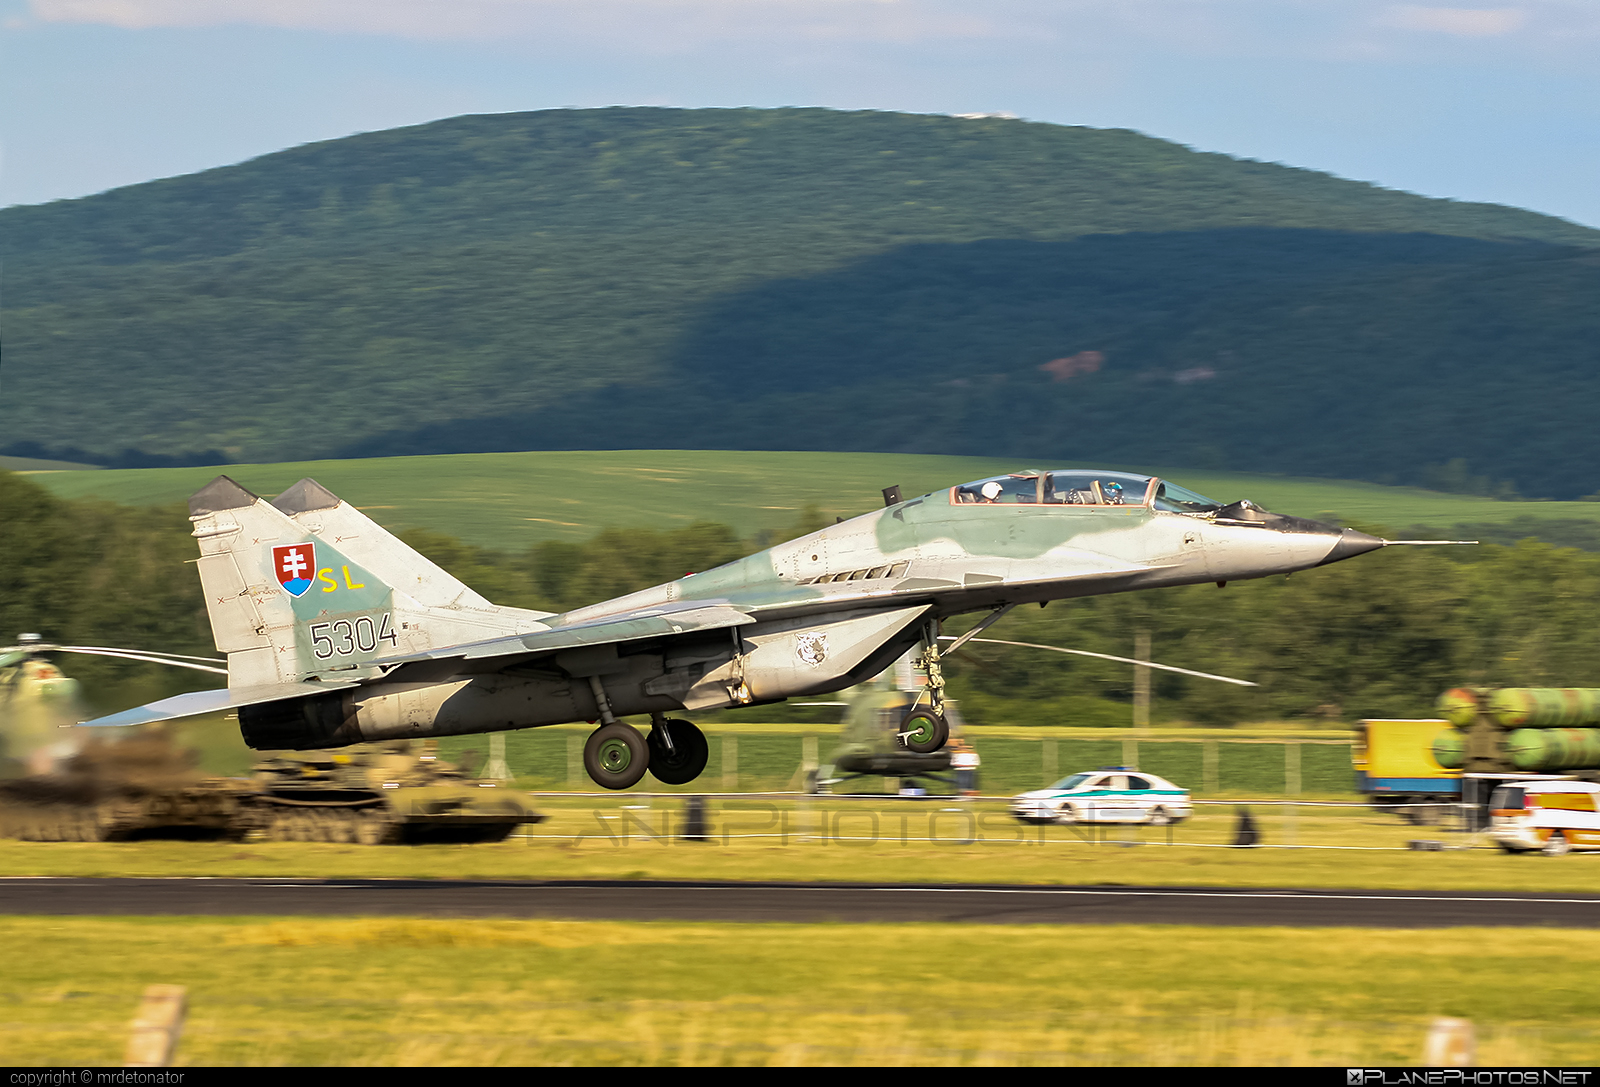 Mikoyan-Gurevich MiG-29UBS - 5304 operated by Vzdušné sily OS SR (Slovak Air Force) #dnh2008 #mig #mig29 #mig29ubs #mikoyangurevich #slovakairforce #vzdusnesilyossr